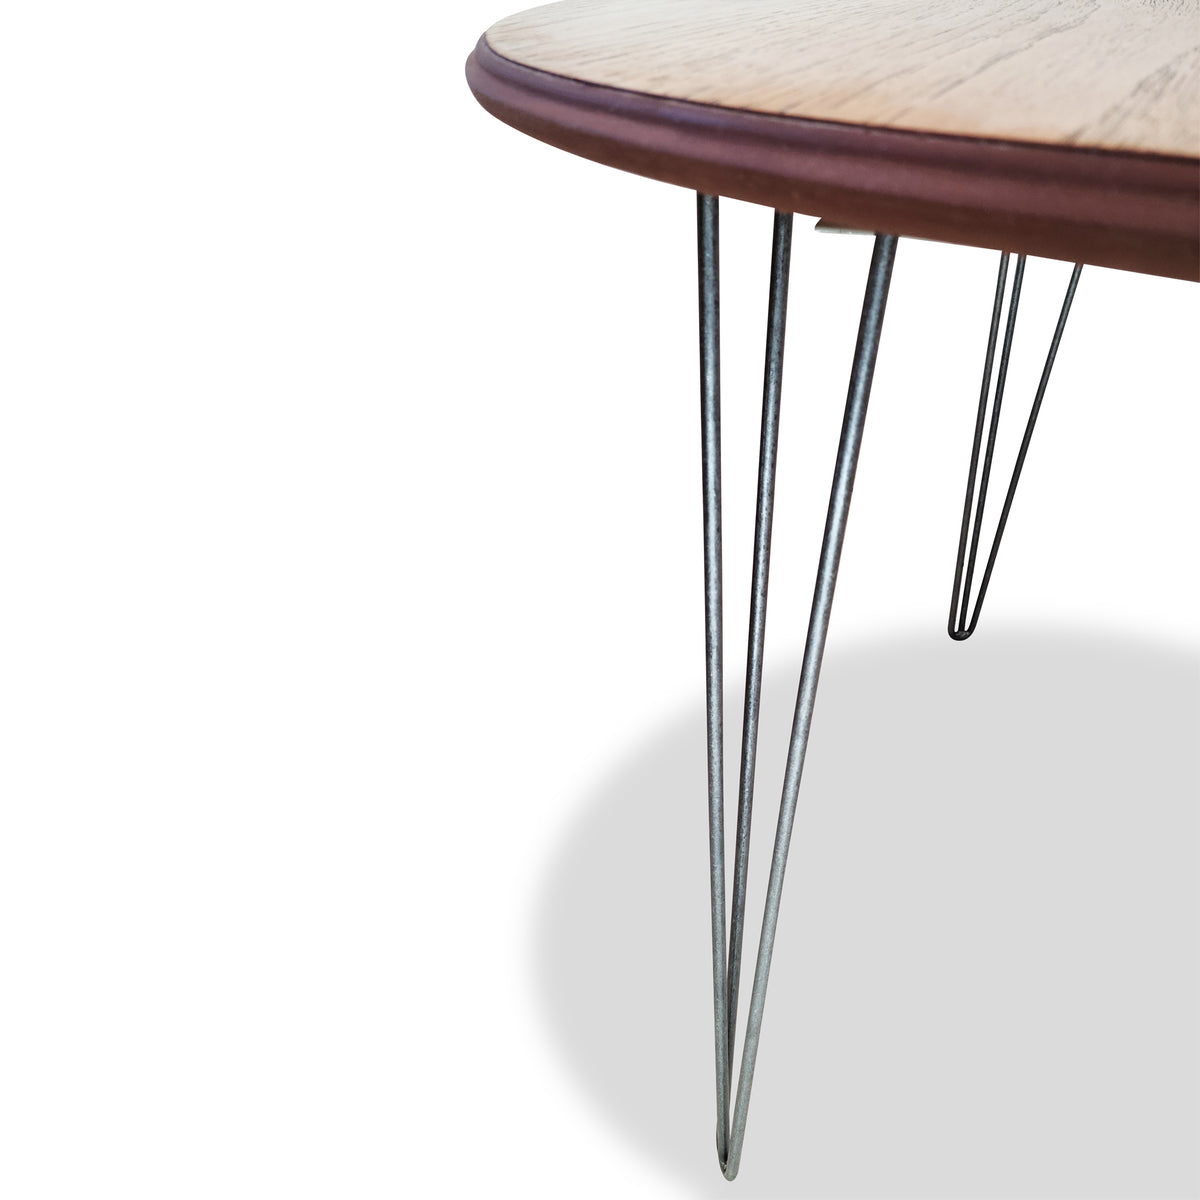 Blonde Dining Table by Deilcraft